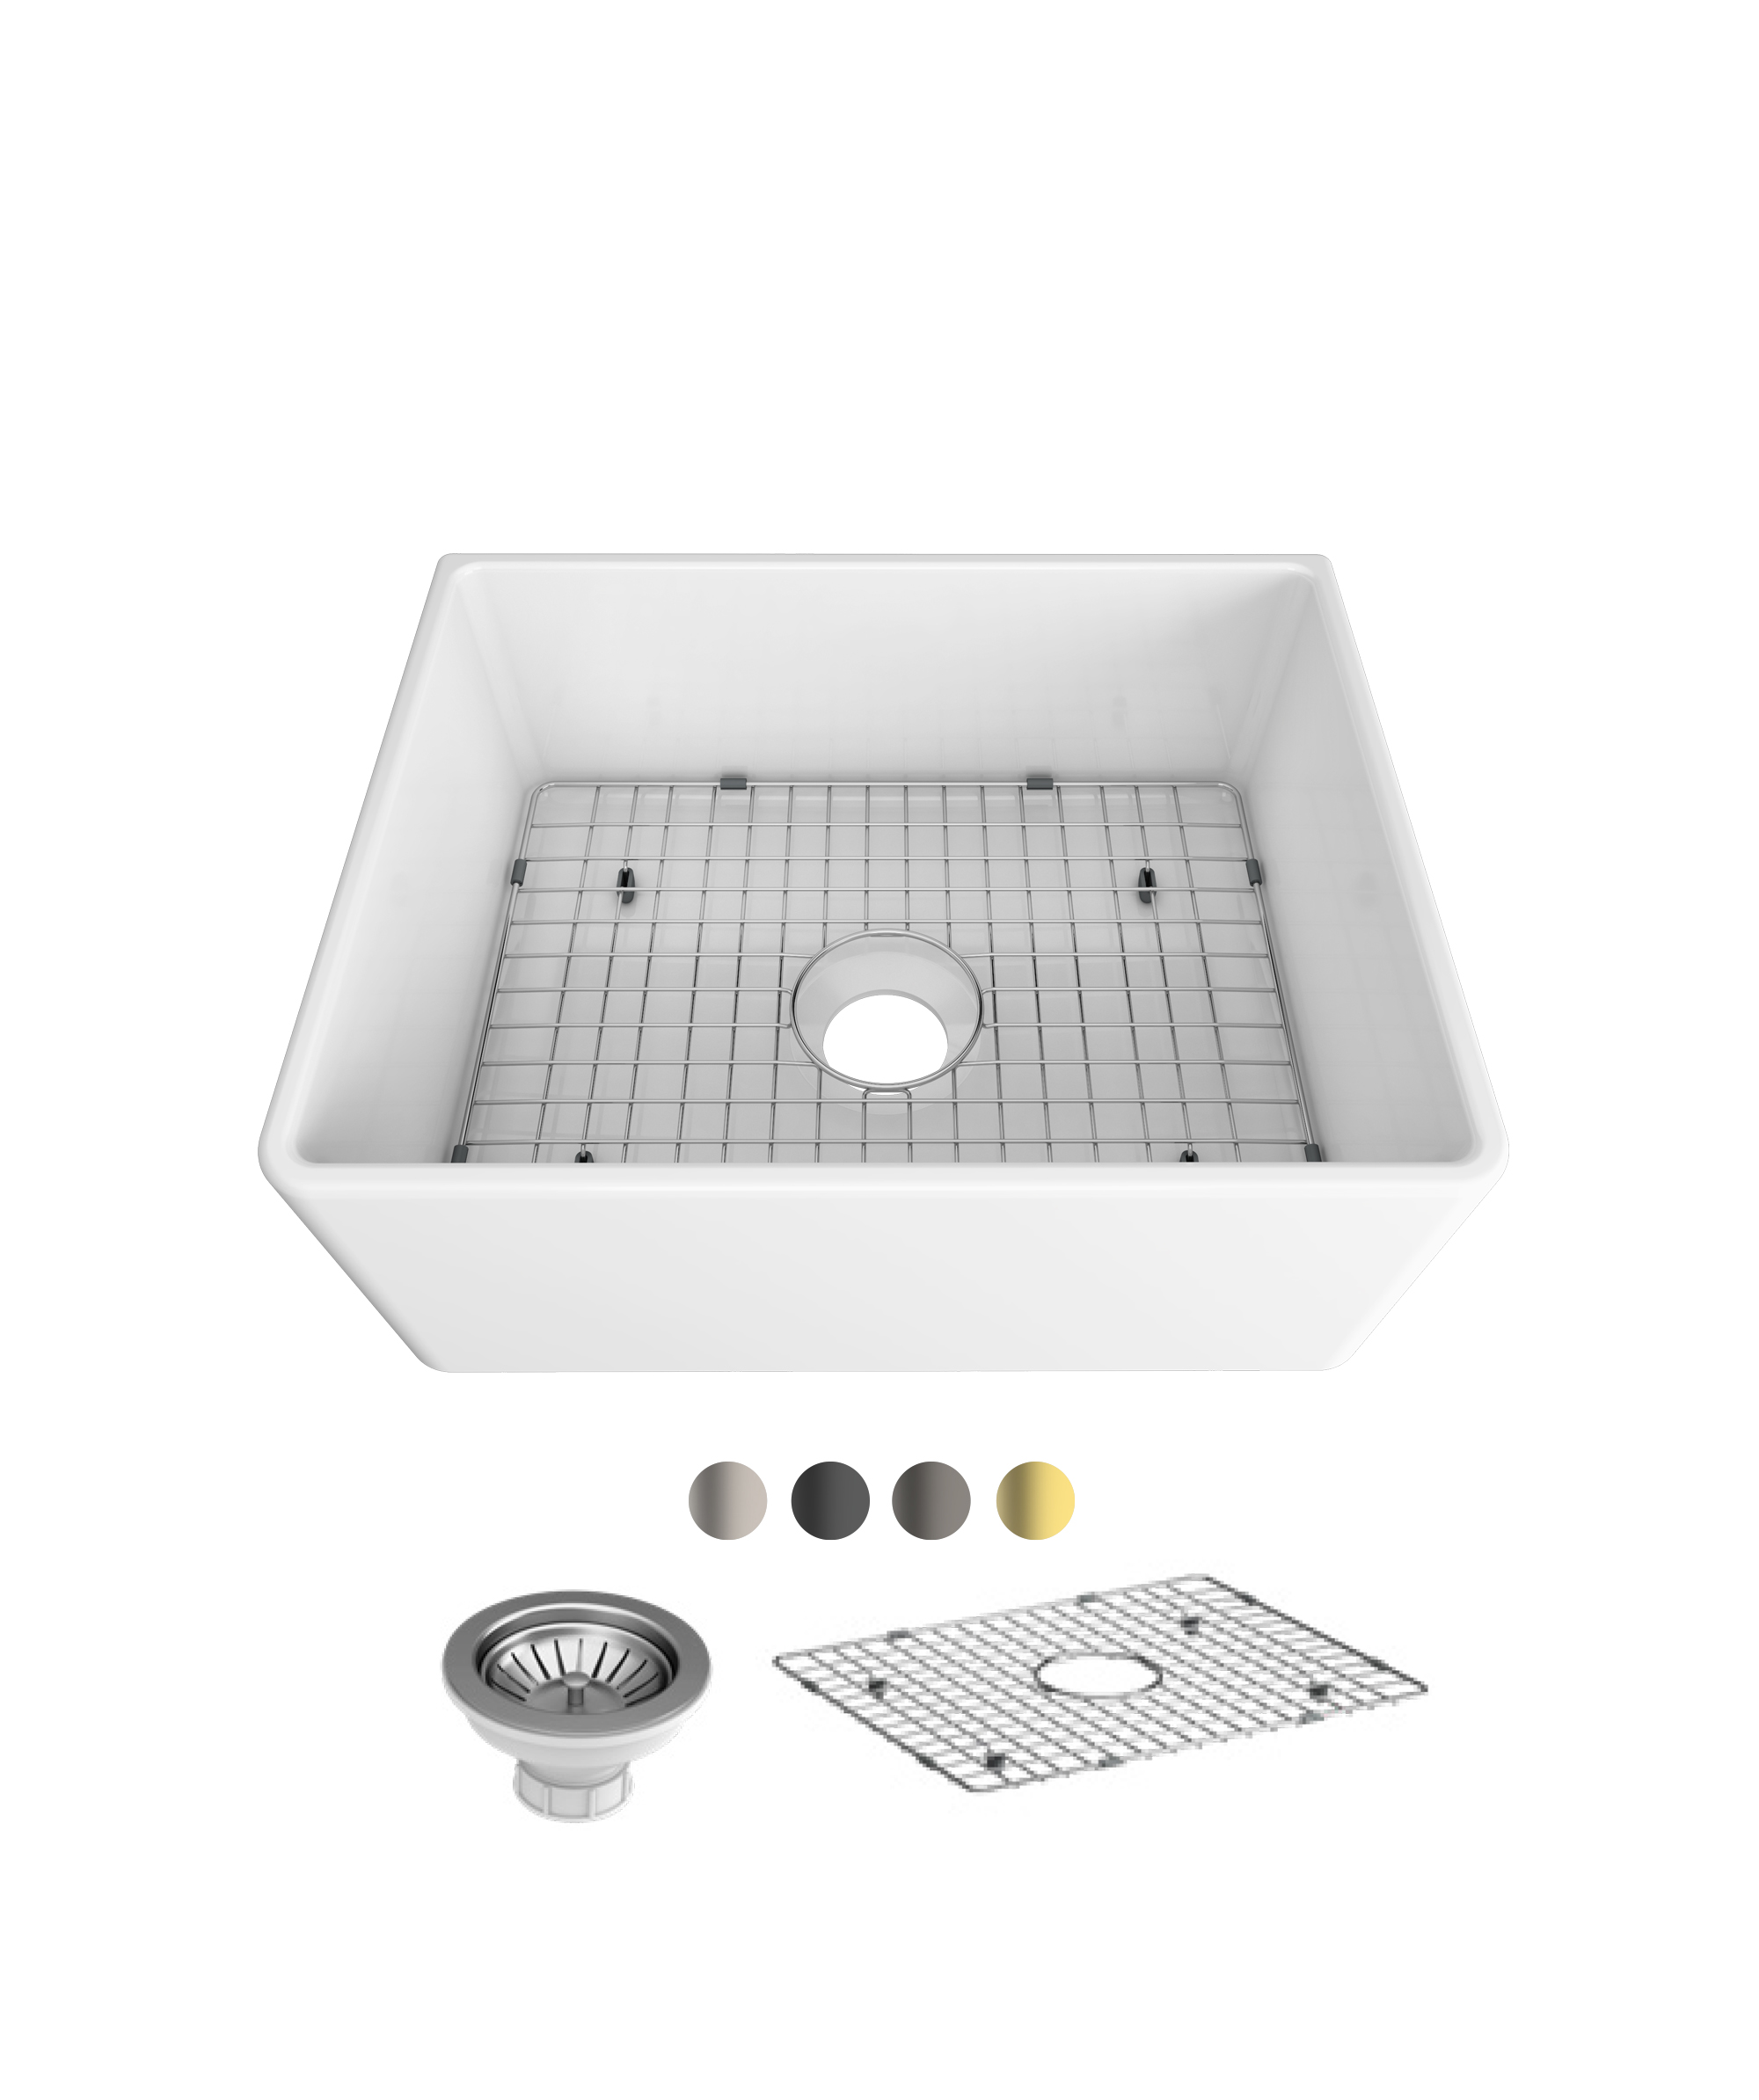 Odessa 610 Apron Front fireclay ceramic sink + optional extras